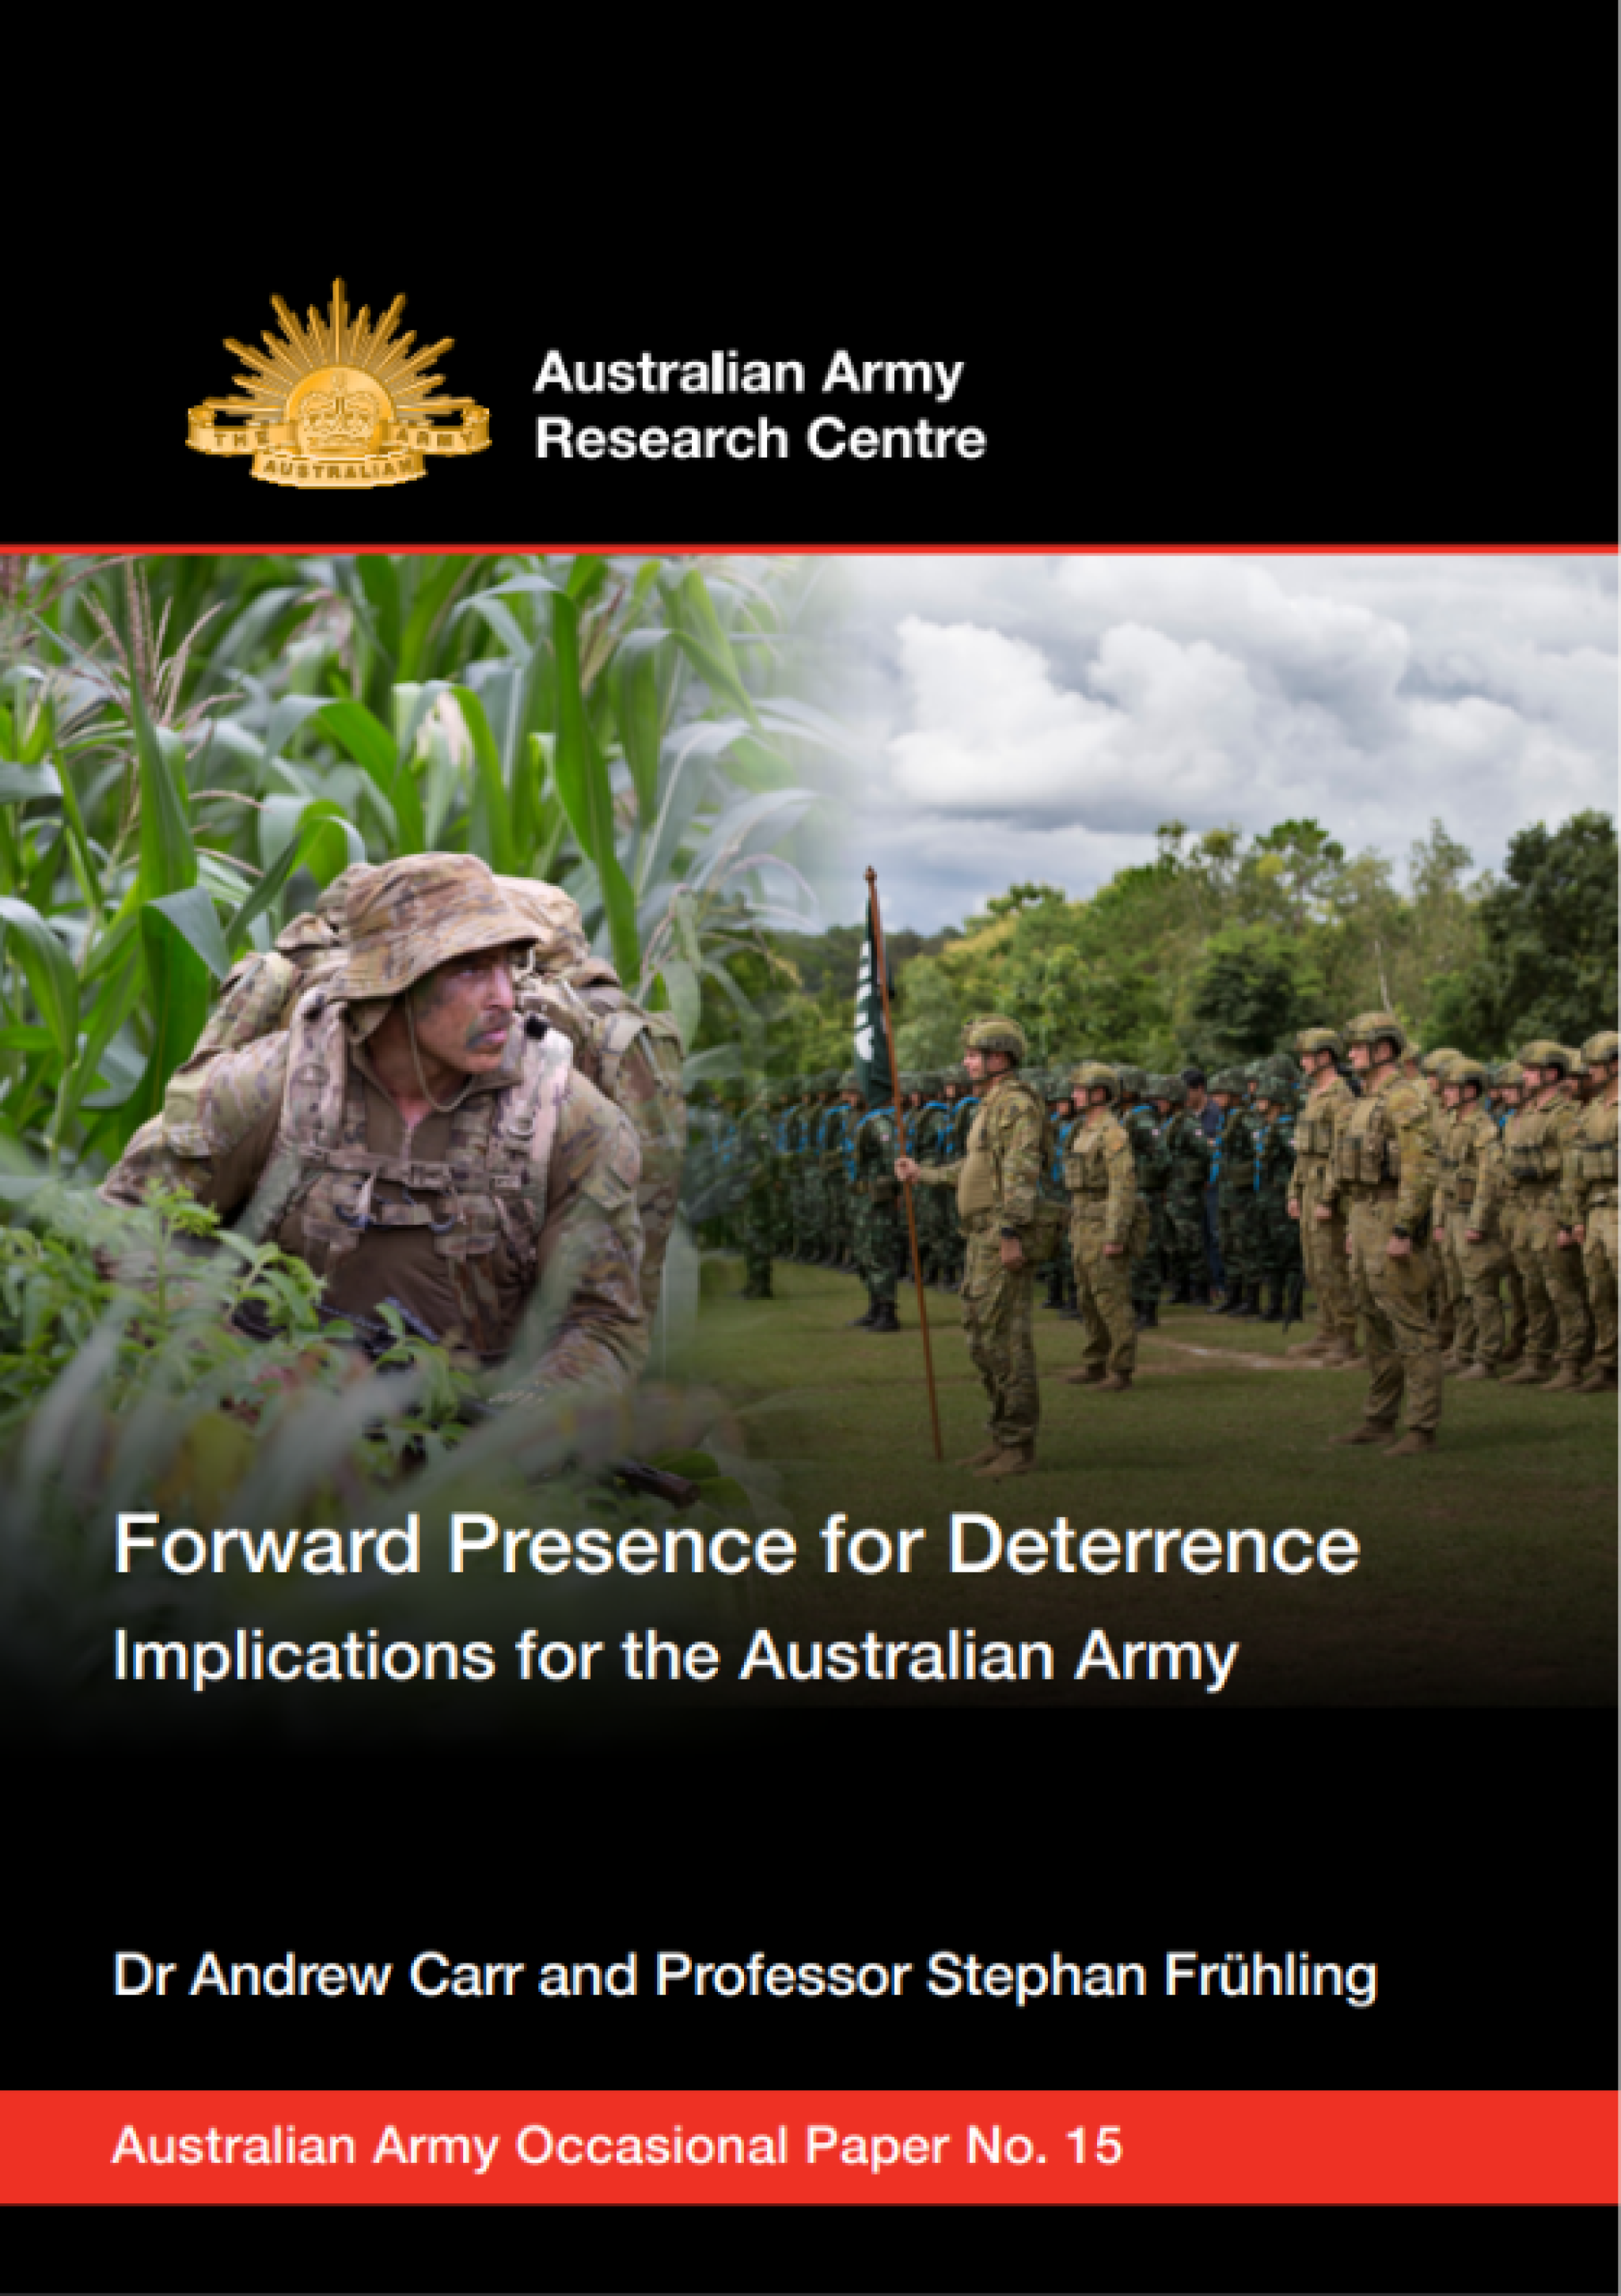 Forward presence for deterrence: Implications for the Australian Army